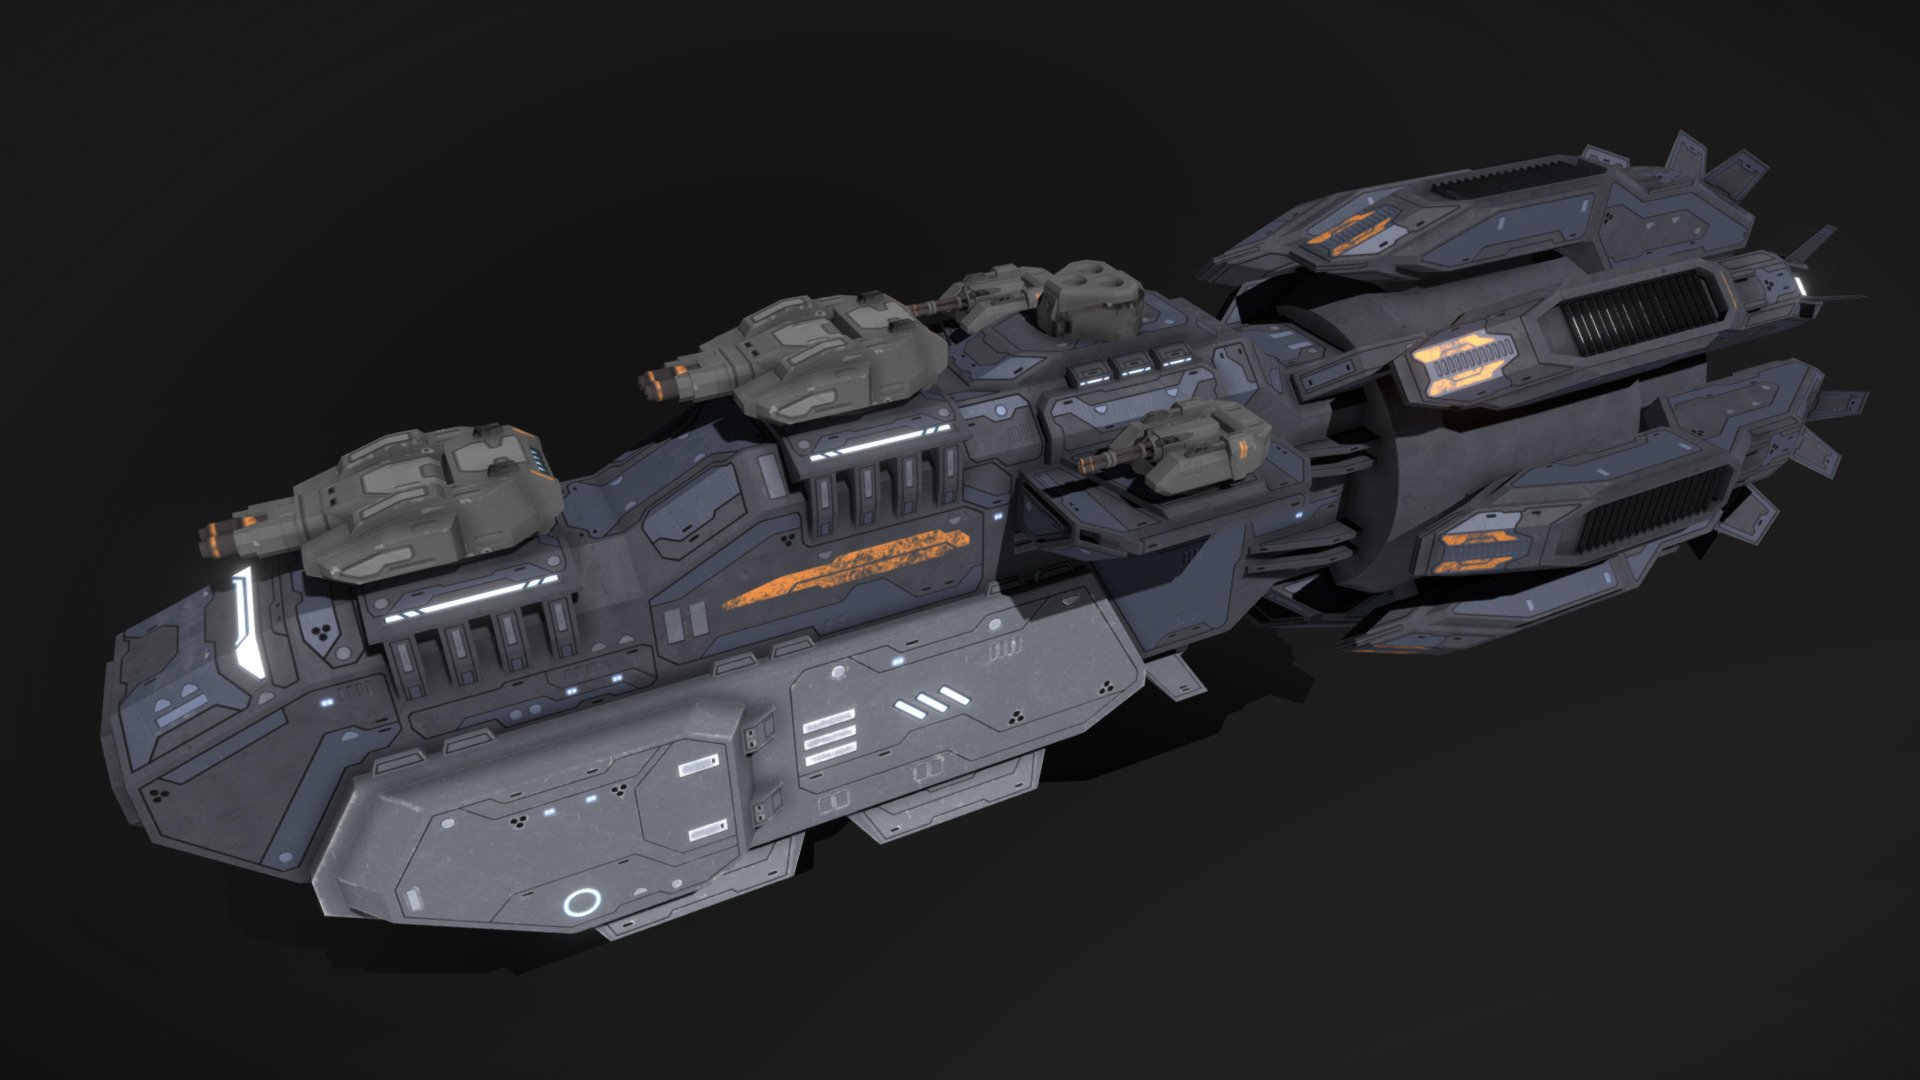 This is a model of a low-poly and game-ready scifi spaceship. 

The weapons are separate meshes and can be animated with a keyframe animation tool. The weapon loadout can be changed as well.

The model comes with several differently colored texture sets. The PSD file with intact layers is included too.

Please note: The textures in the Sketchfab viewer have a reduced resolution to improve Sketchfab loading speed.

If you have bought this model please make sure to download the “additional file”.  It contains FBX and OBJ meshes, full resolution textures and the source PSDs with intact layers. The meshes are separate and can be animated (e.g. firing animations for gun barrels, rotating turrets, etc) 3d model